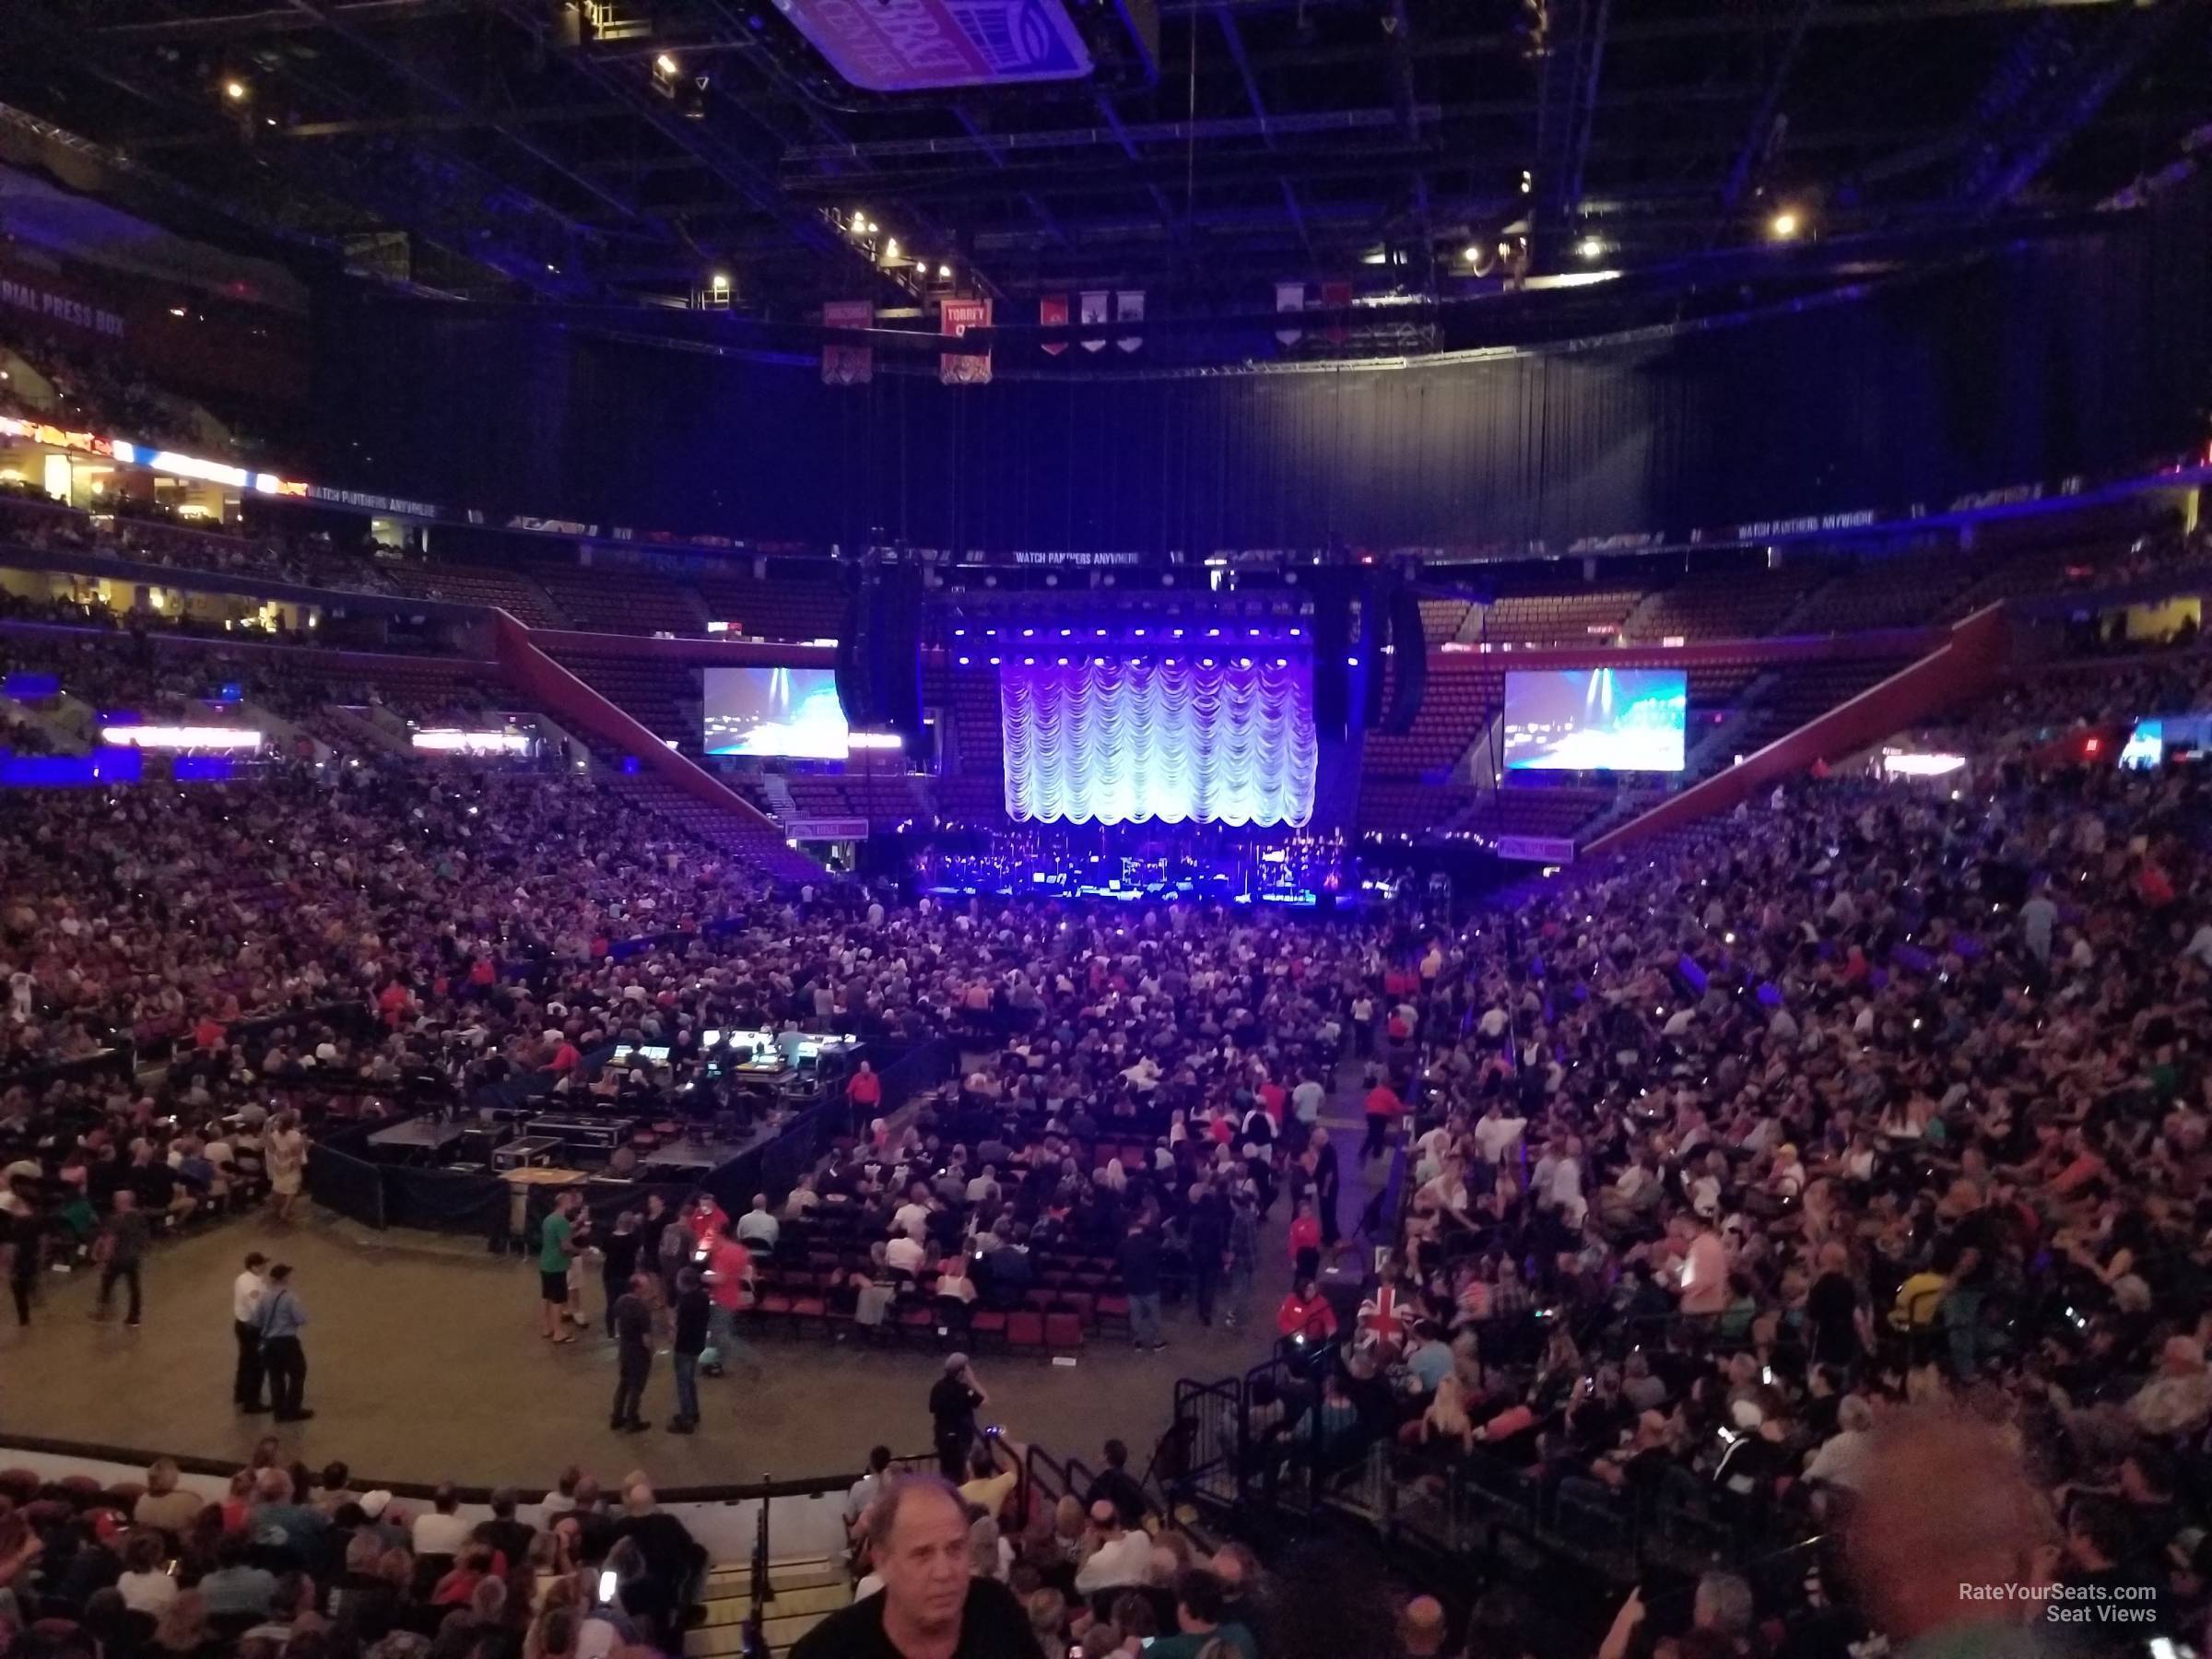 section 108, row 18 seat view  for concert - fla live arena